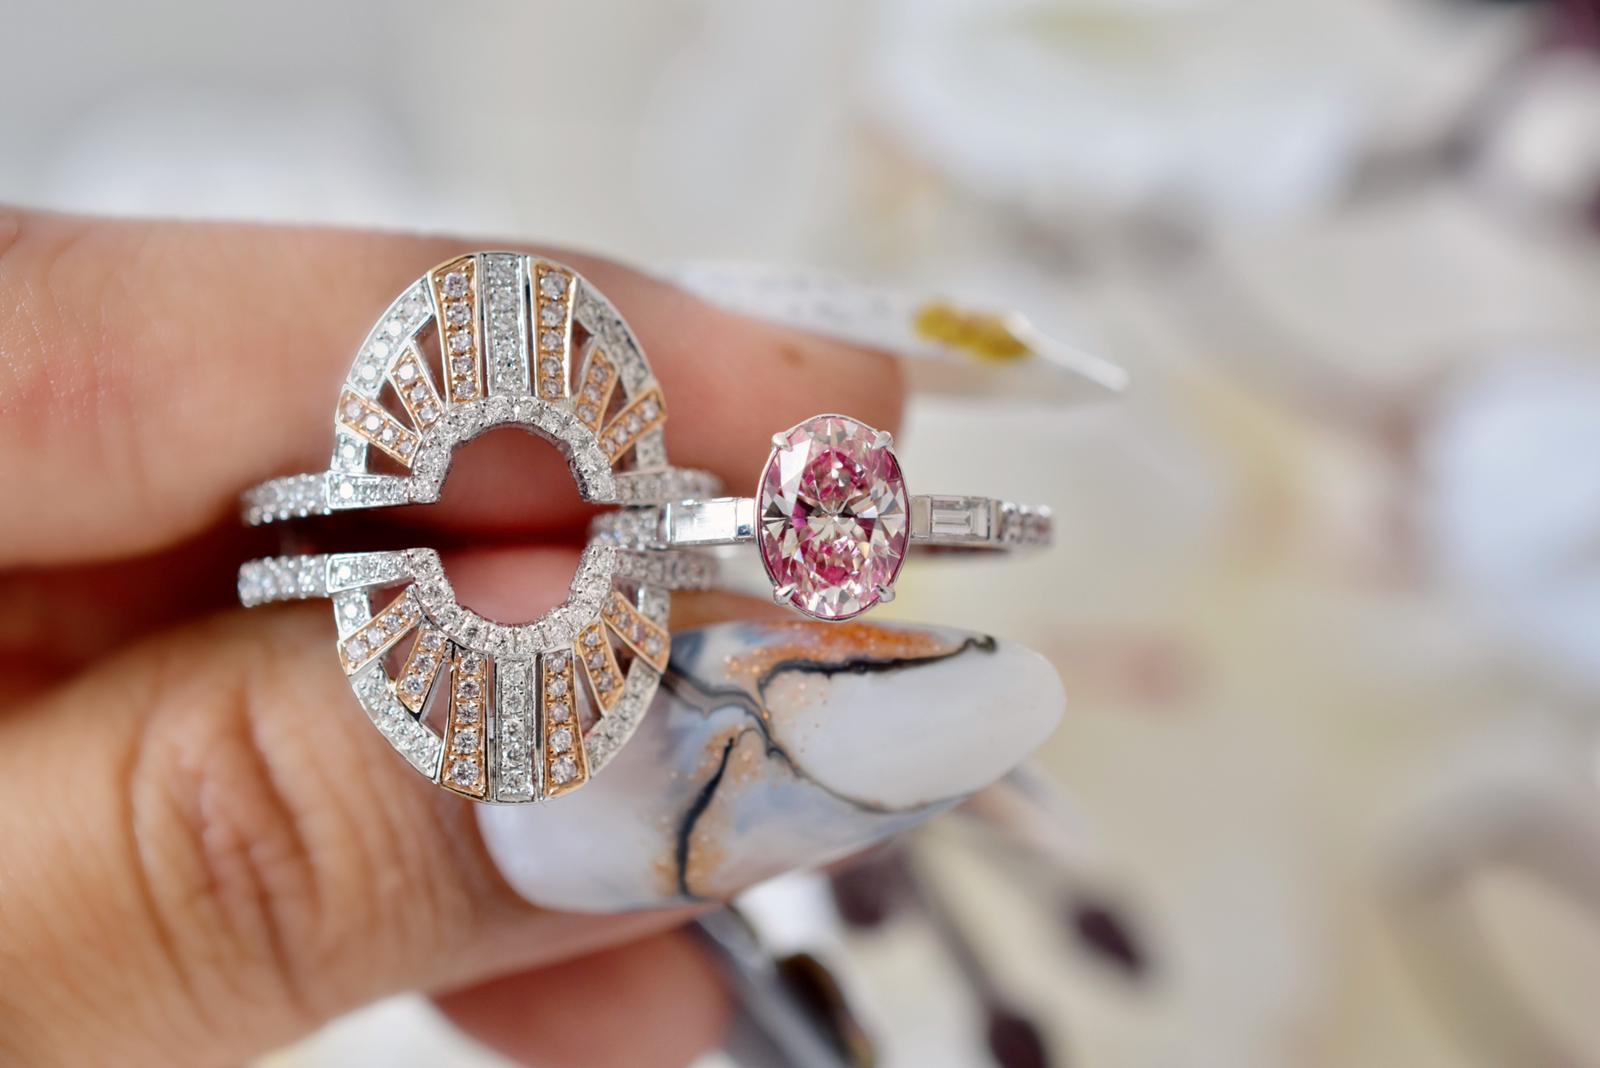 AGL Certified 1.01 Carat Fancy Pink Diamond Ring VS Clarity For Sale 2